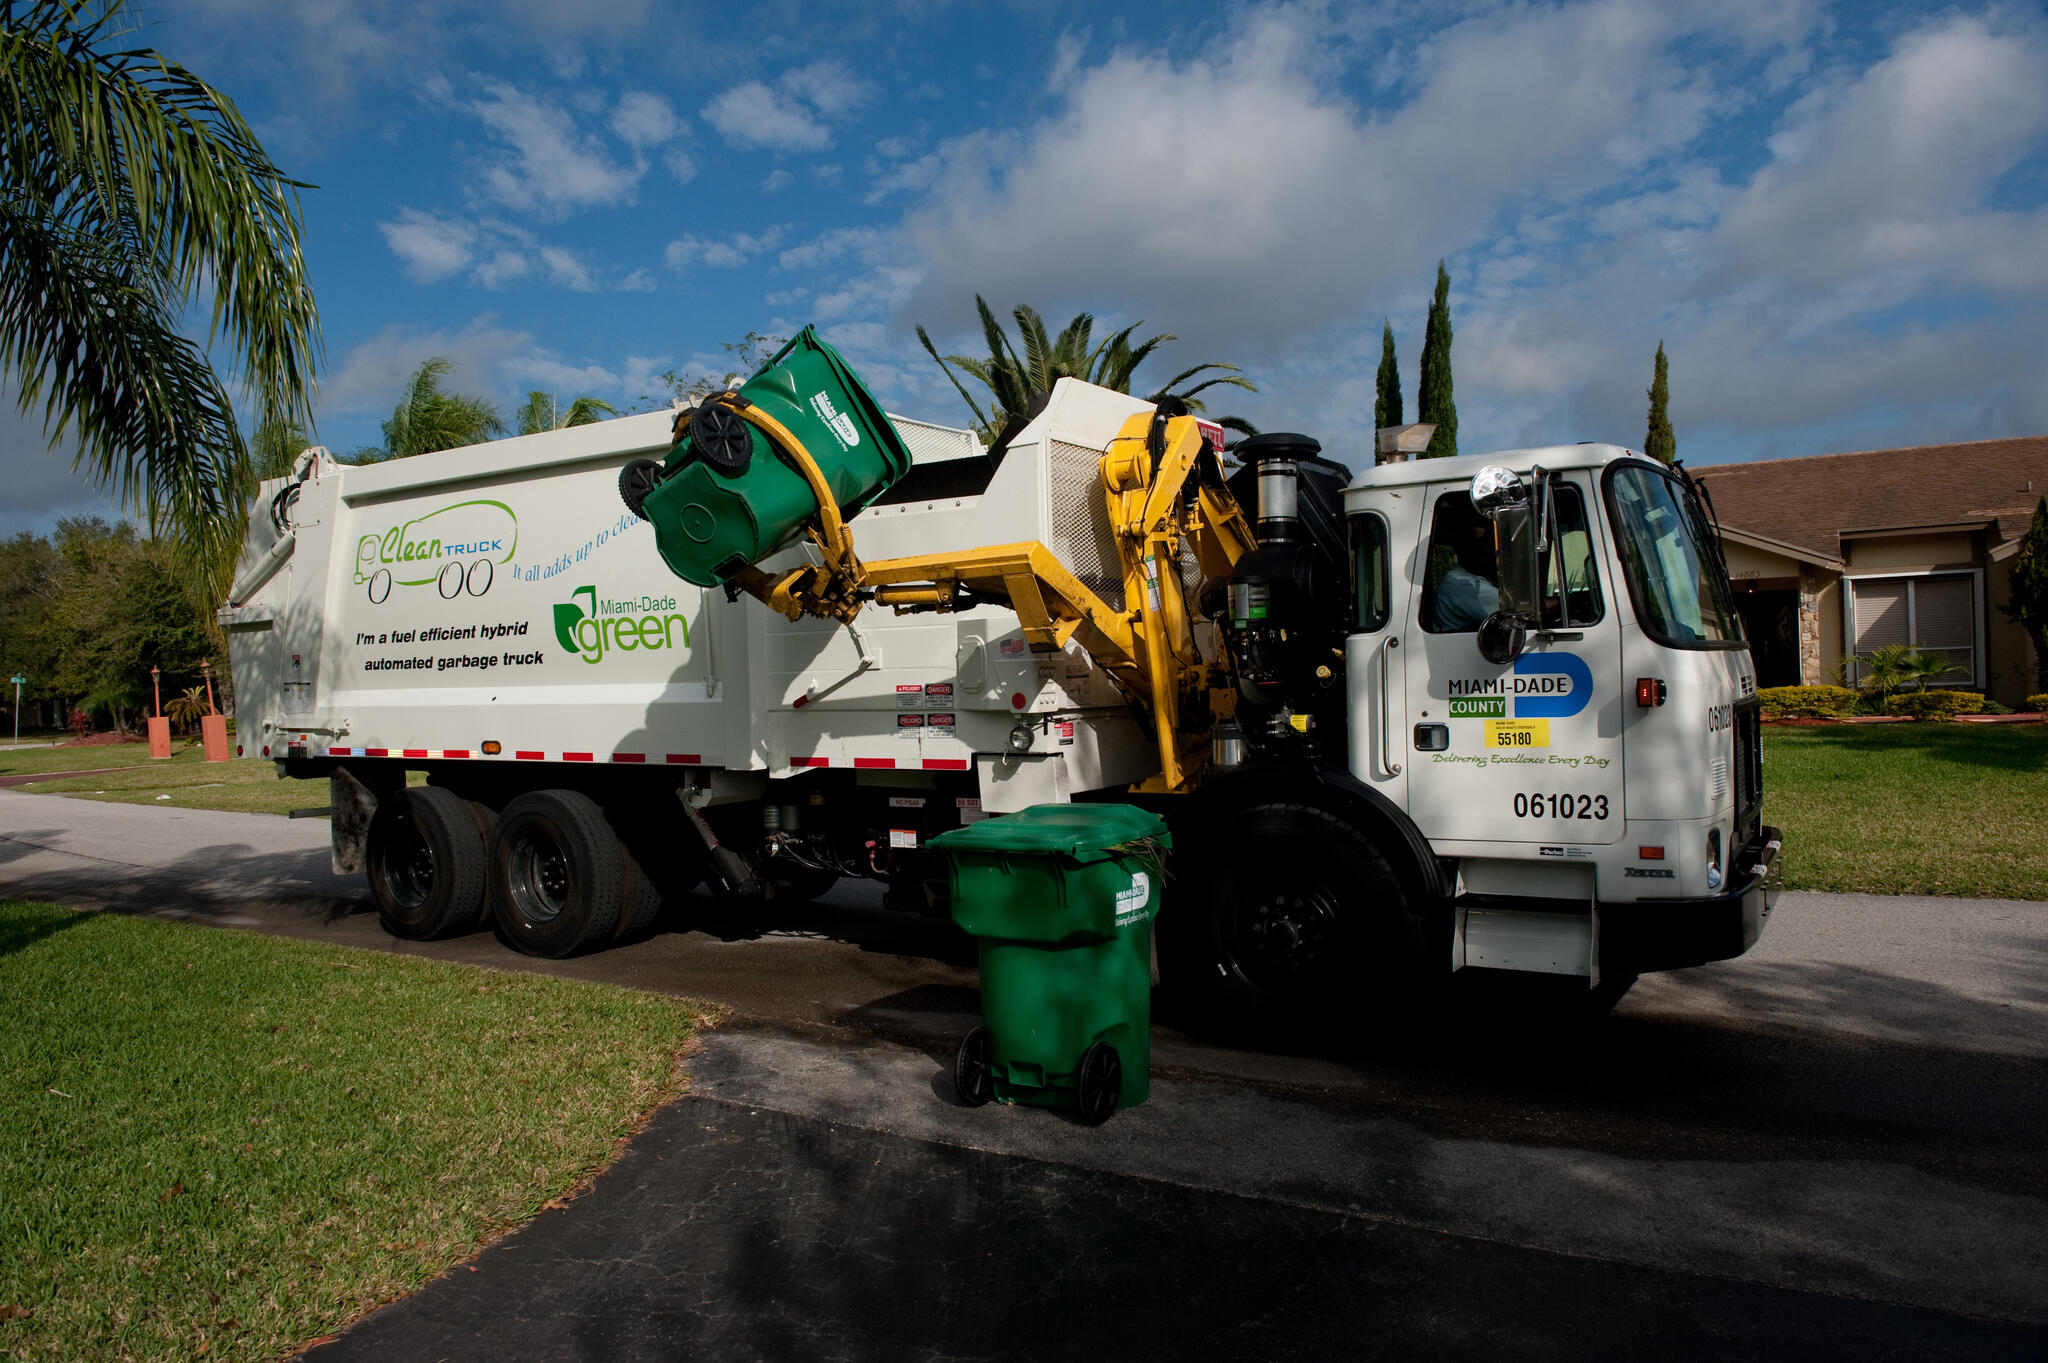 MiamiDade County Department of Solid Waste Management delayed garbage